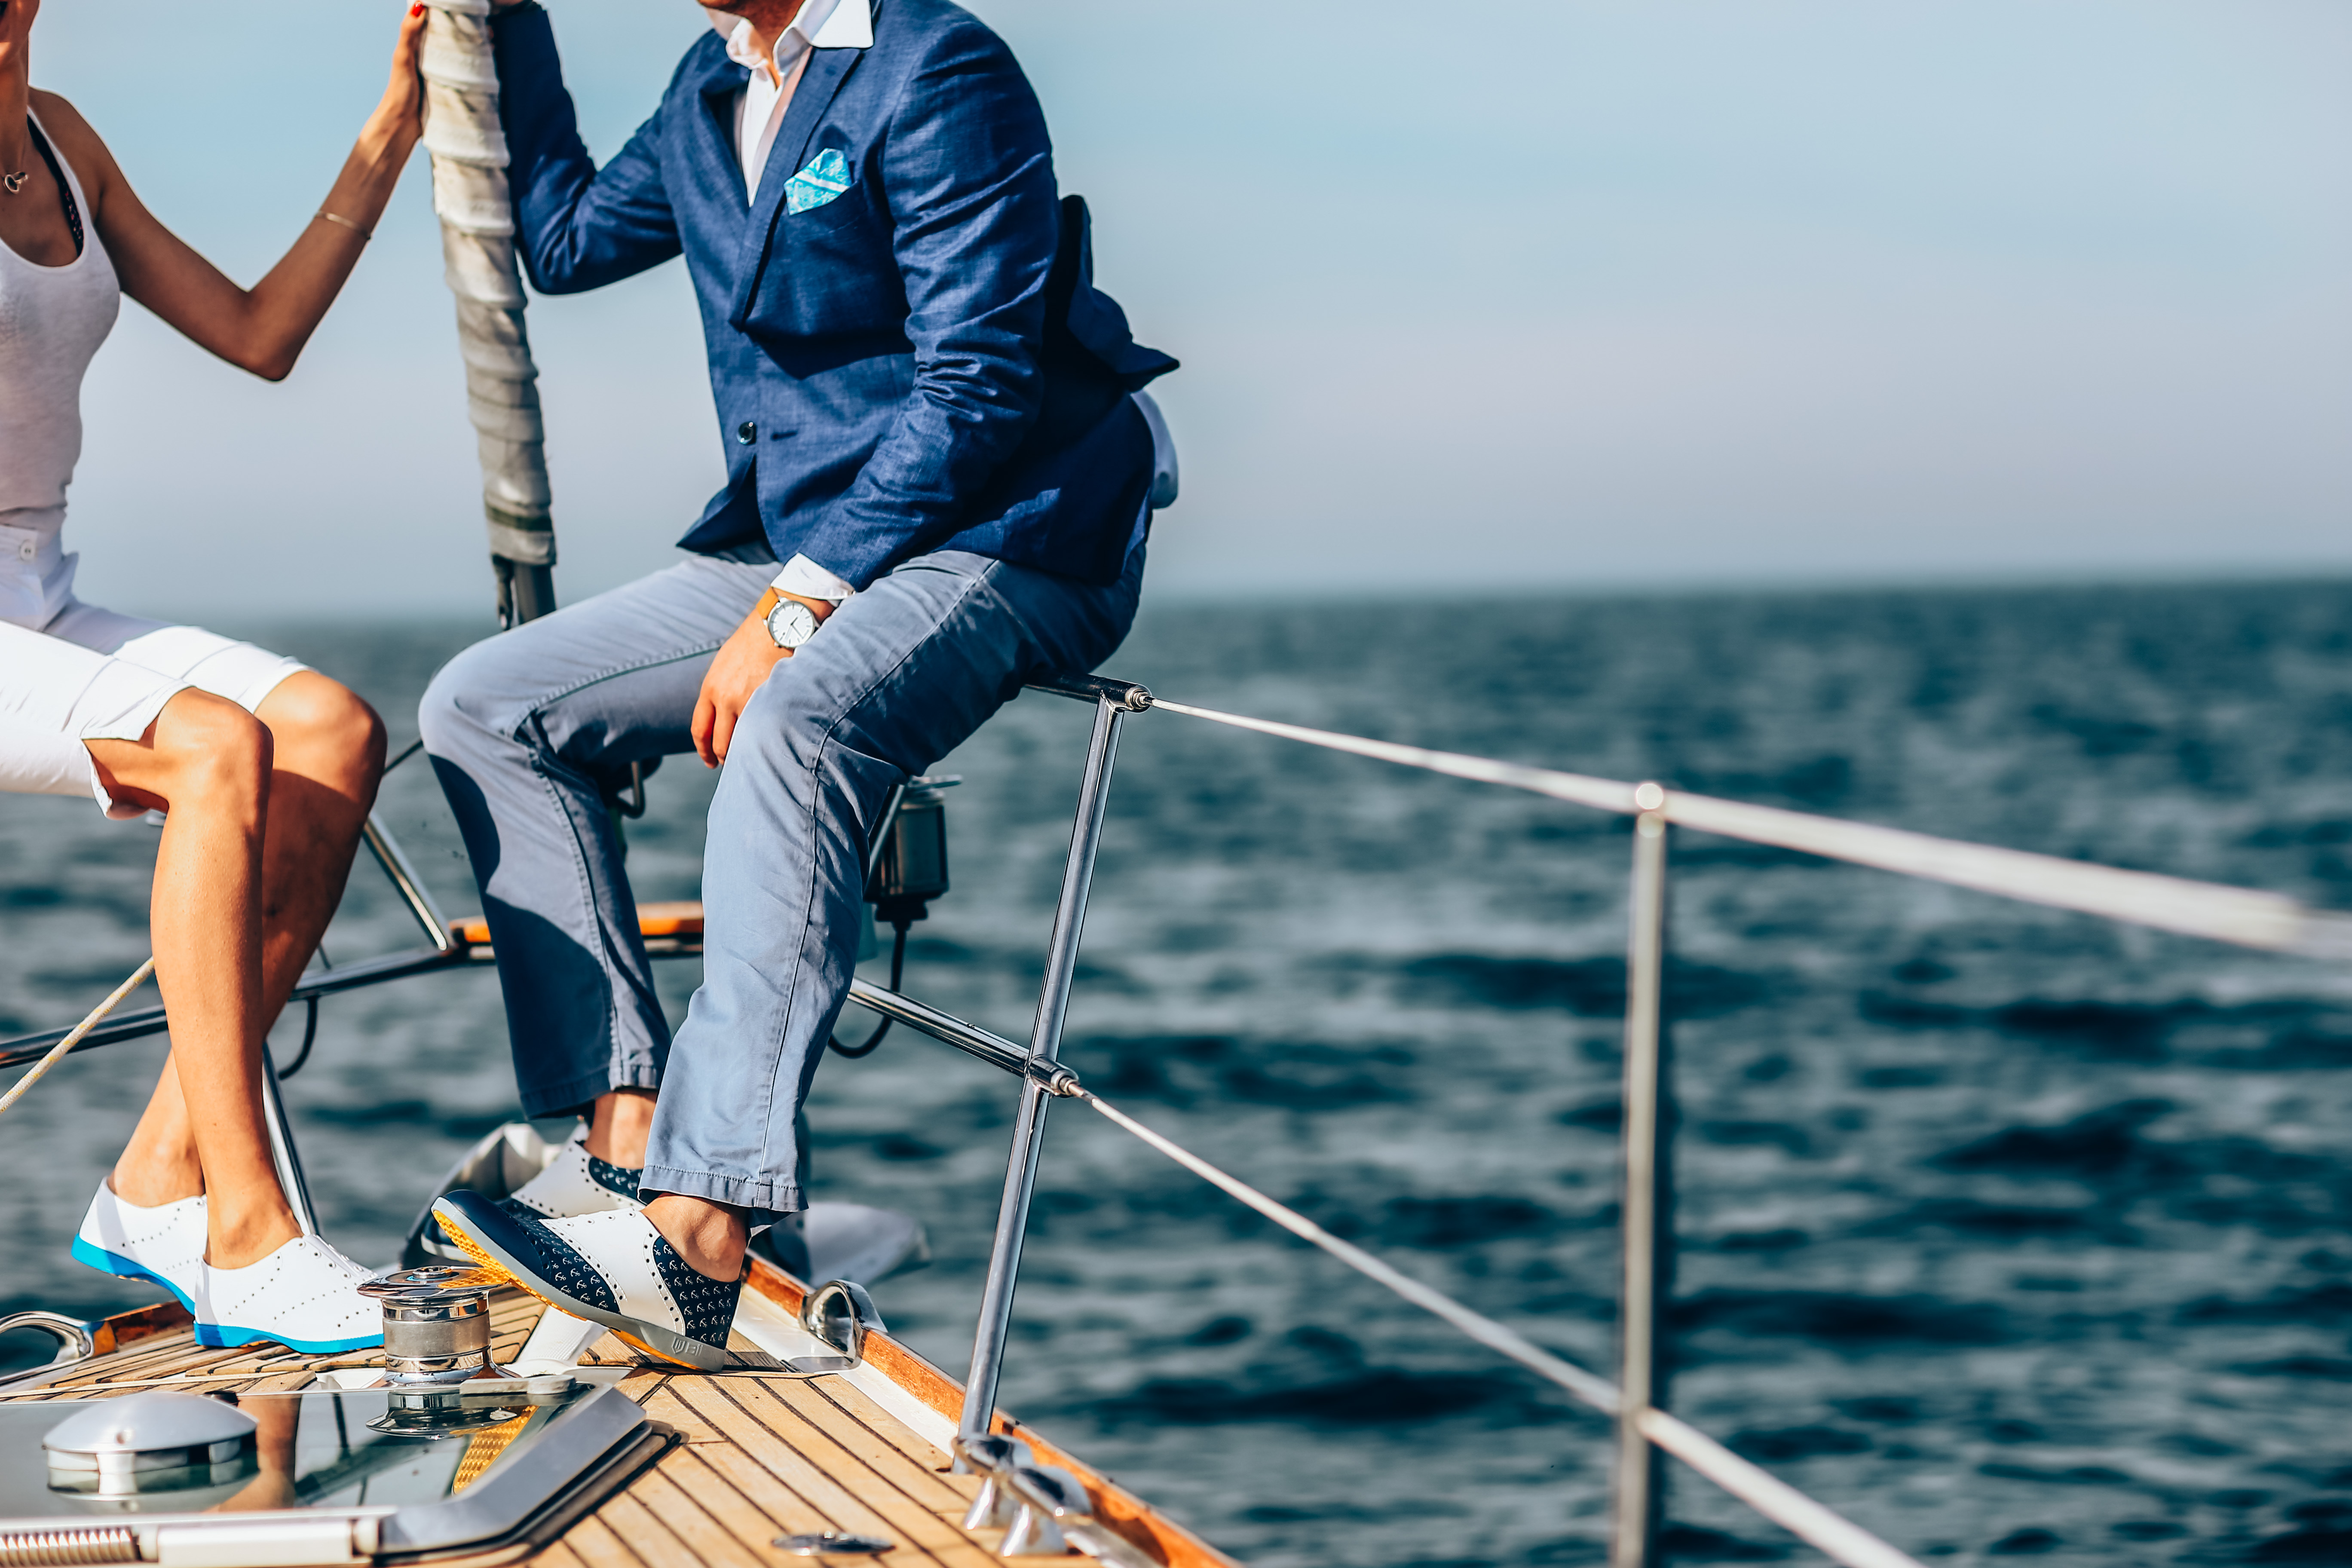 BIION FOOTWEAR YACHT - Yachting Pages